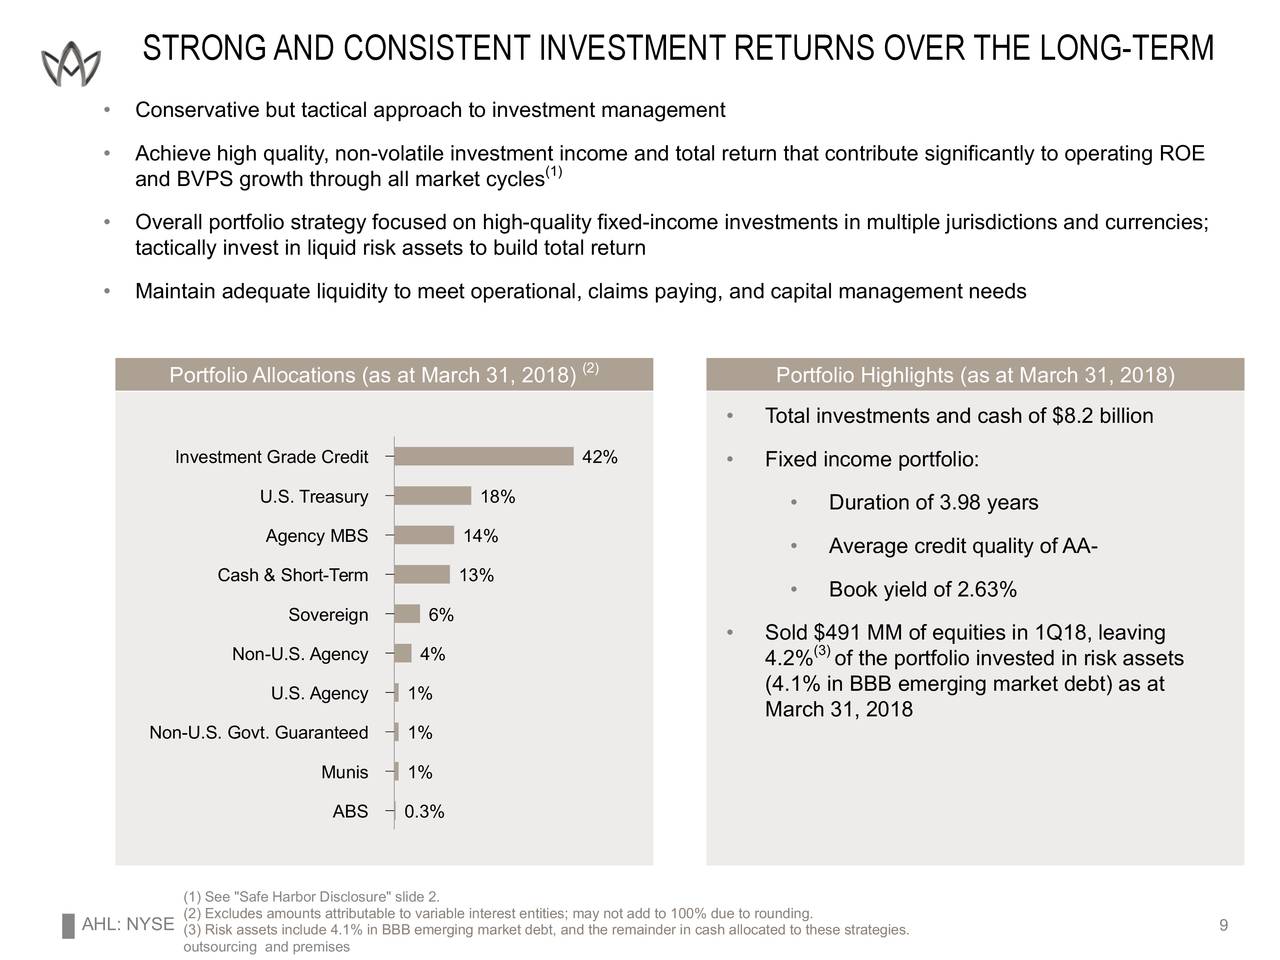 STRONGAND CONSISTENT INVESTMENT RETURNS OVER THE LONG-TERM